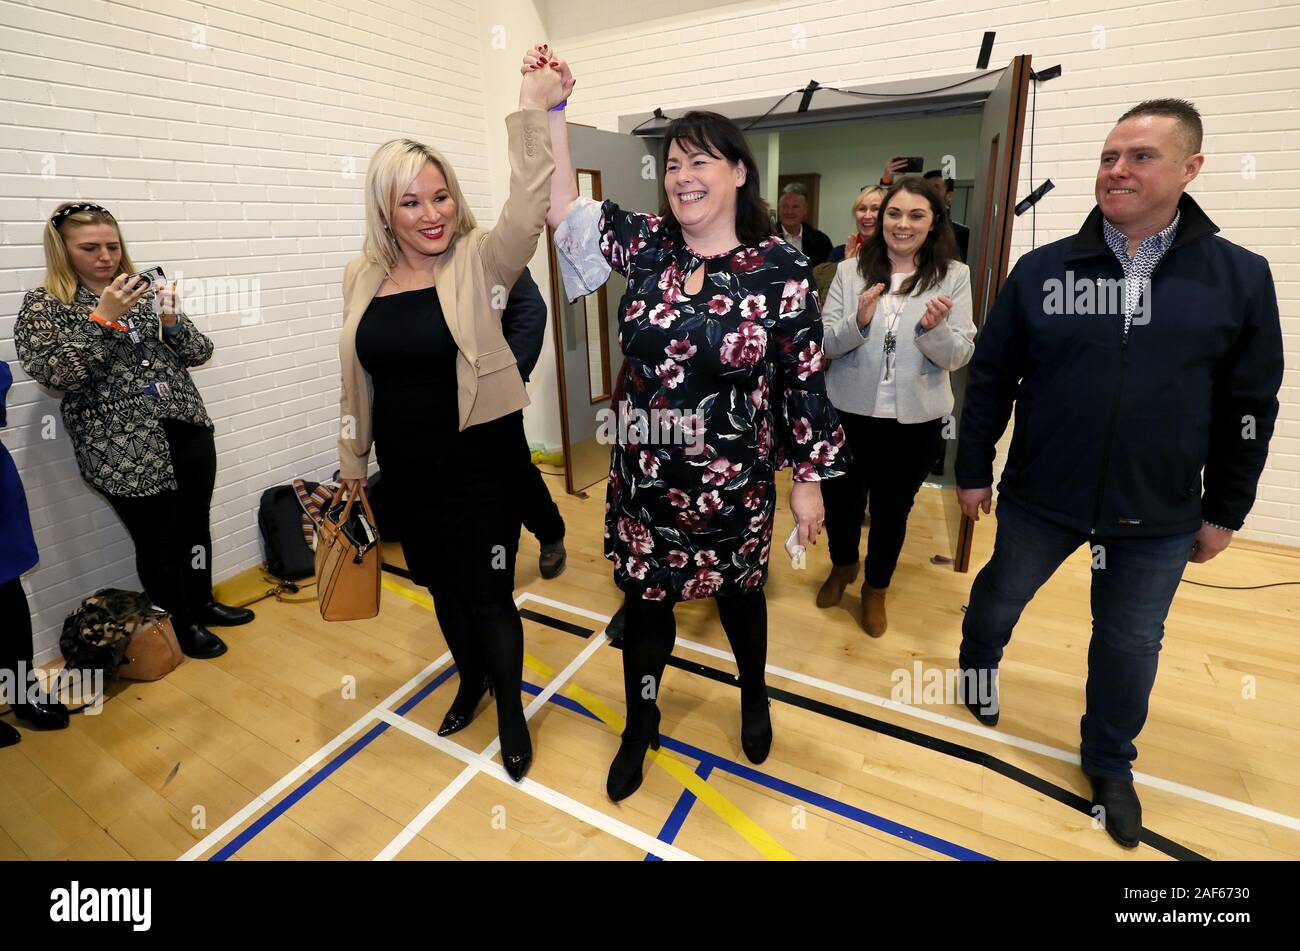 Sinn Fein candidate for Fermanagh/South Tyrone Michelle Gildernew (centre) celebrates with deputy leader Michelle O'Neill (second left) after she was announced as elected at the Leisure Centre, in Omagh, Northern Ireland, as counting continues in the 2019 General Election. Stock Photo